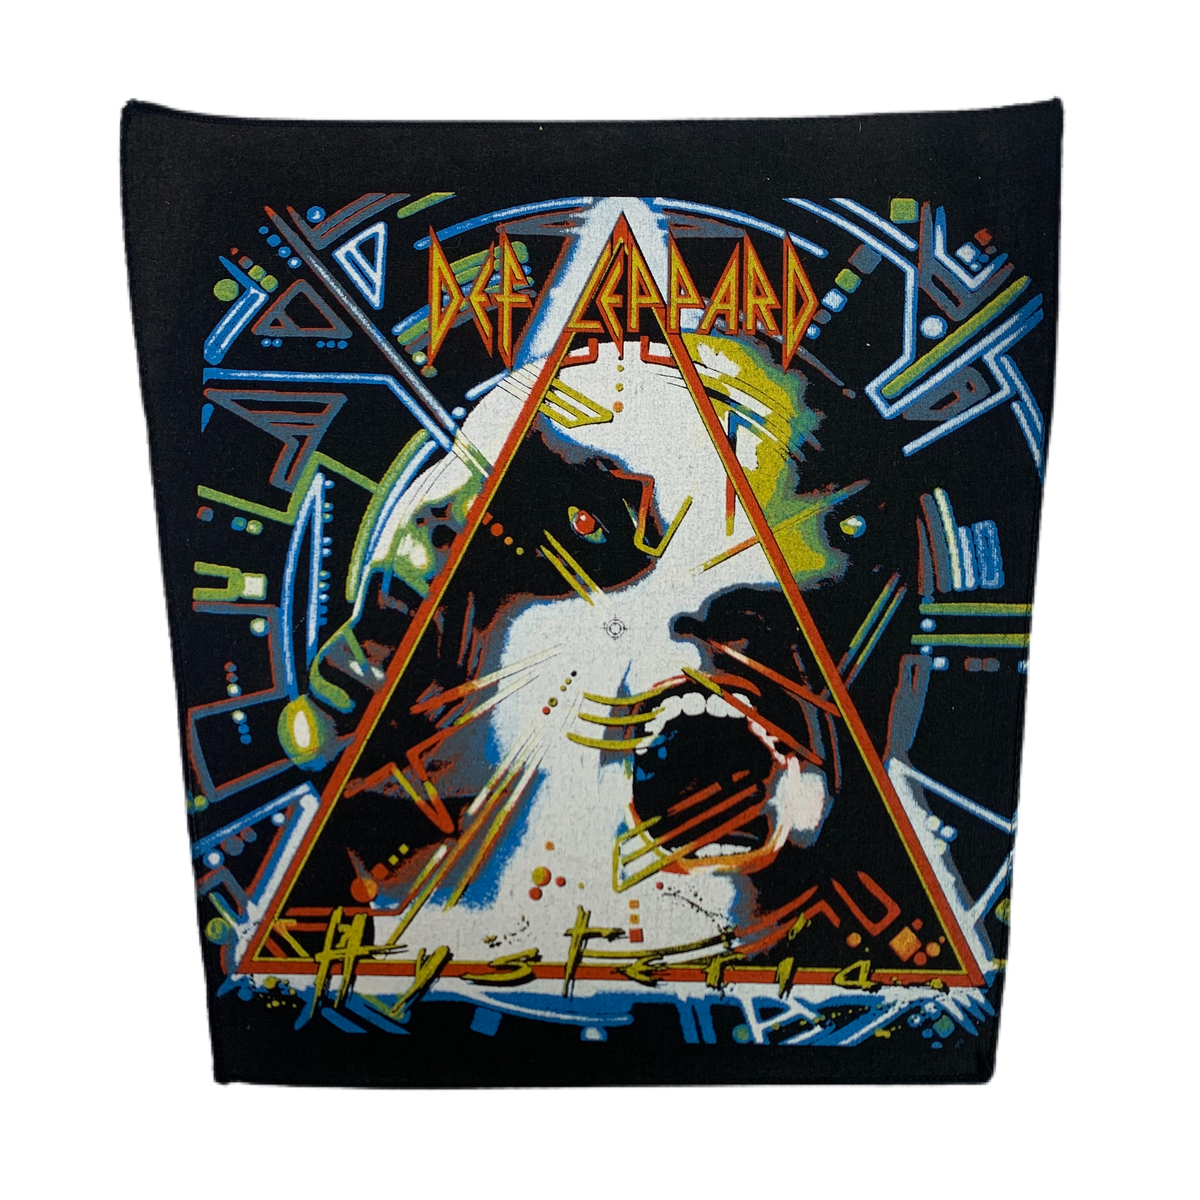 Vintage Def Leppard “Hysteria” Back Patch